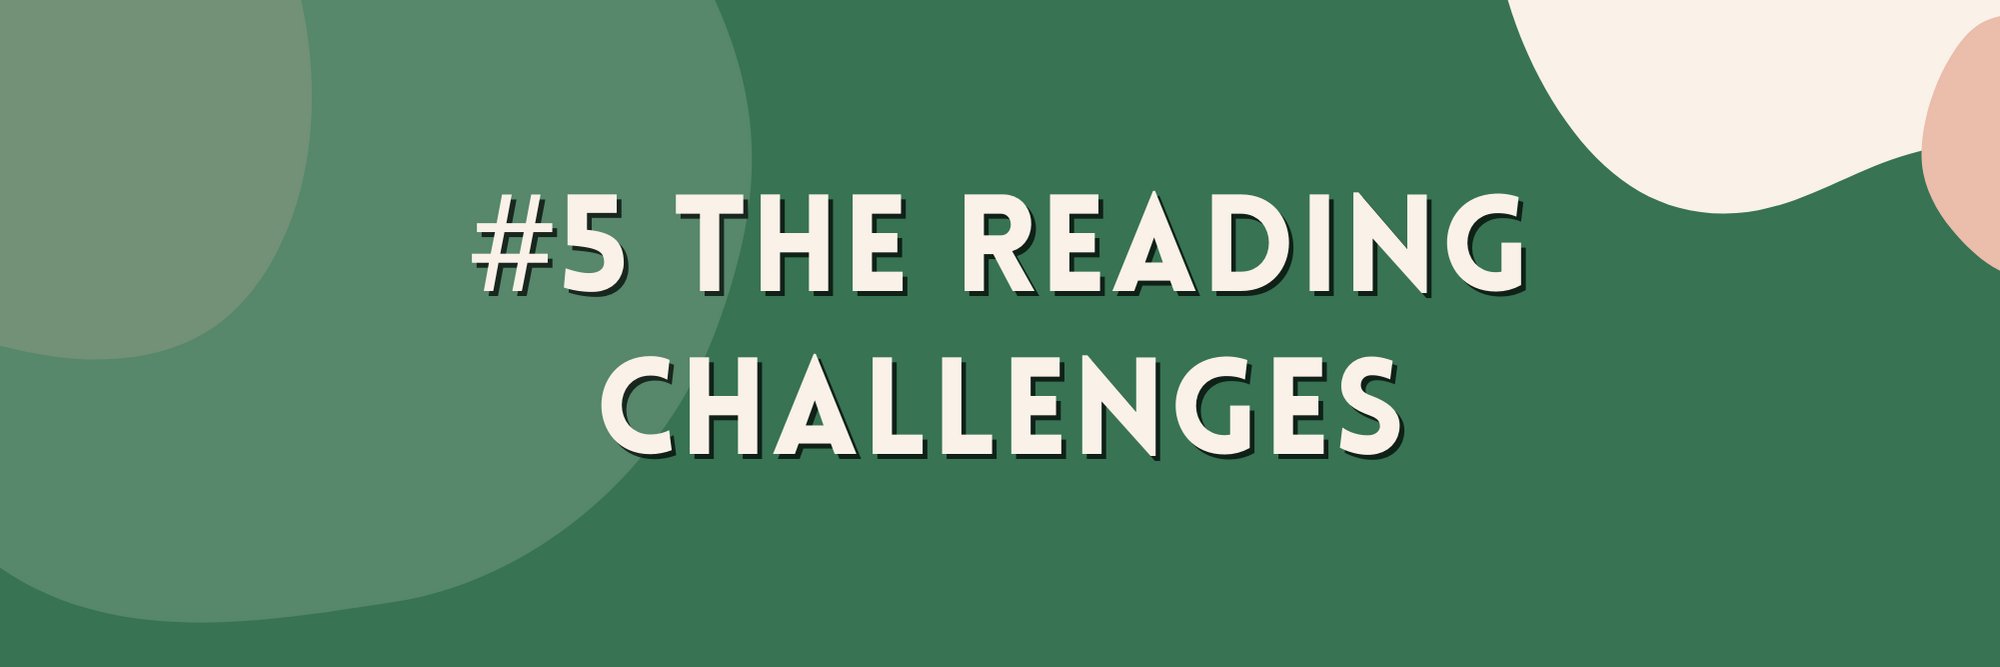 the reading challenges